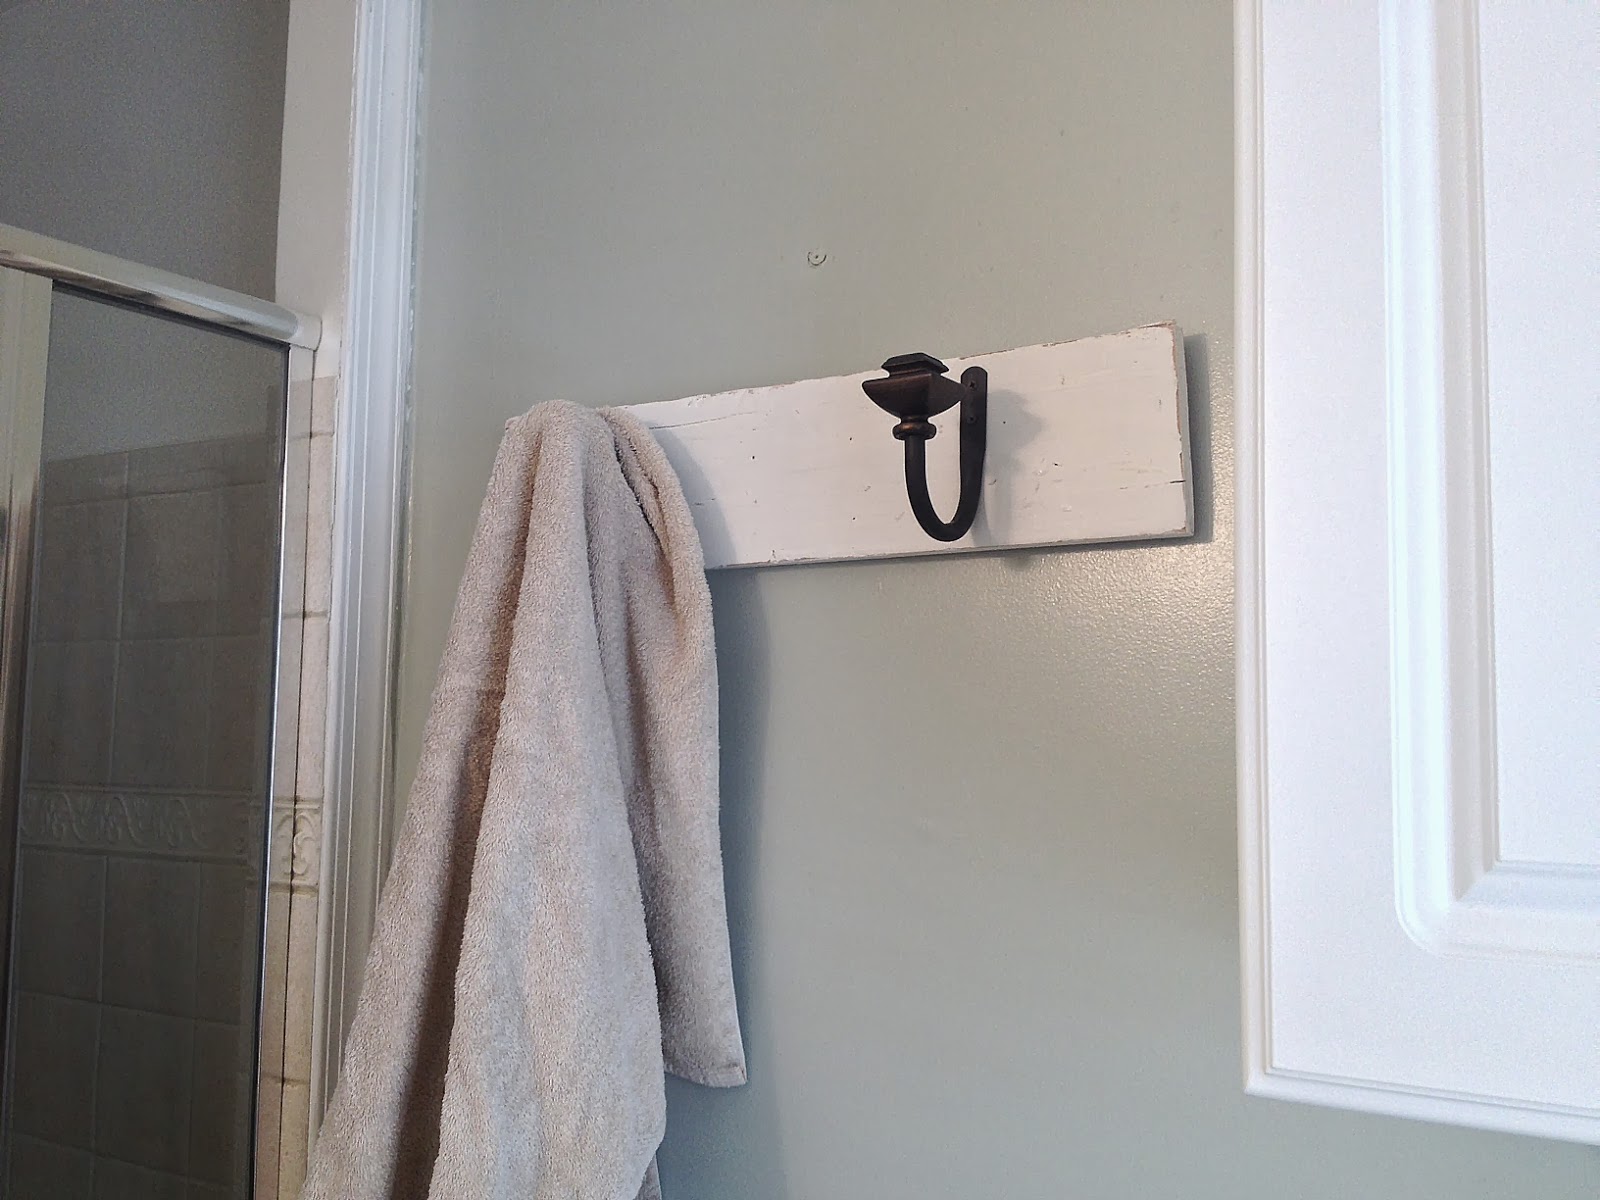 Two It Yourself DIY Towel Hooks From Old Curtain Tie Backs 15